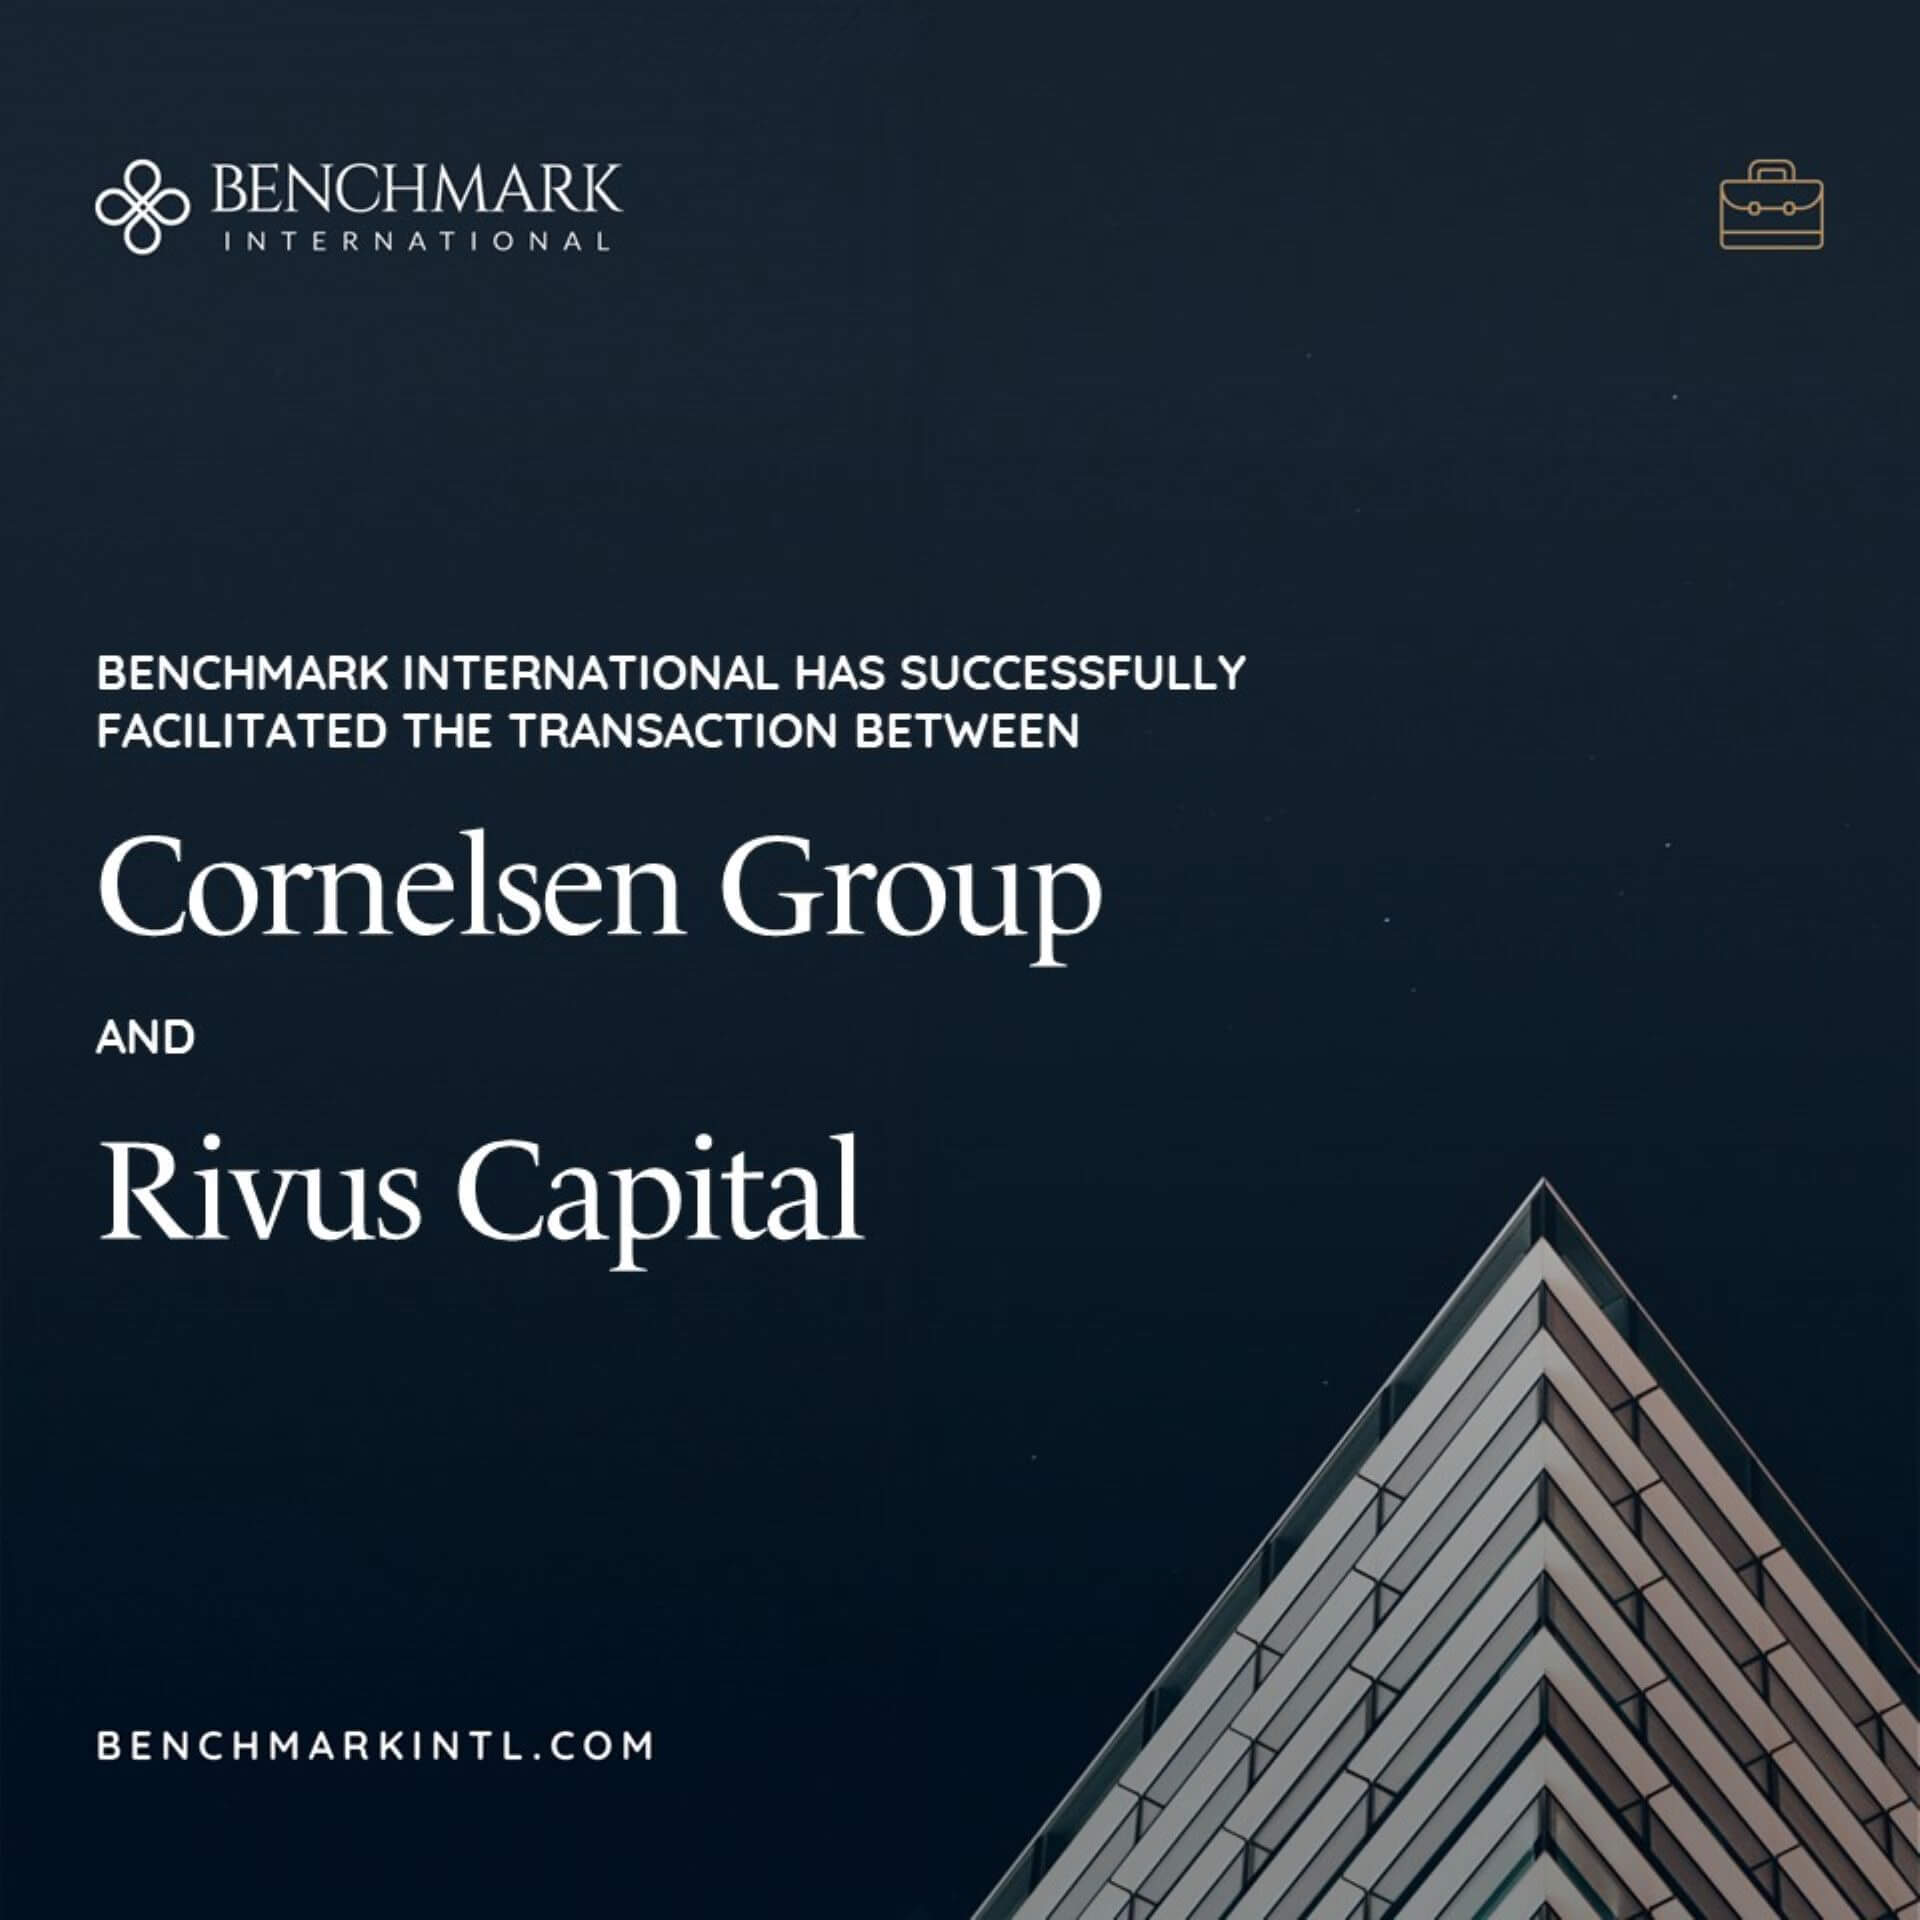 Cornelsen Group acquired by Rivus Capital